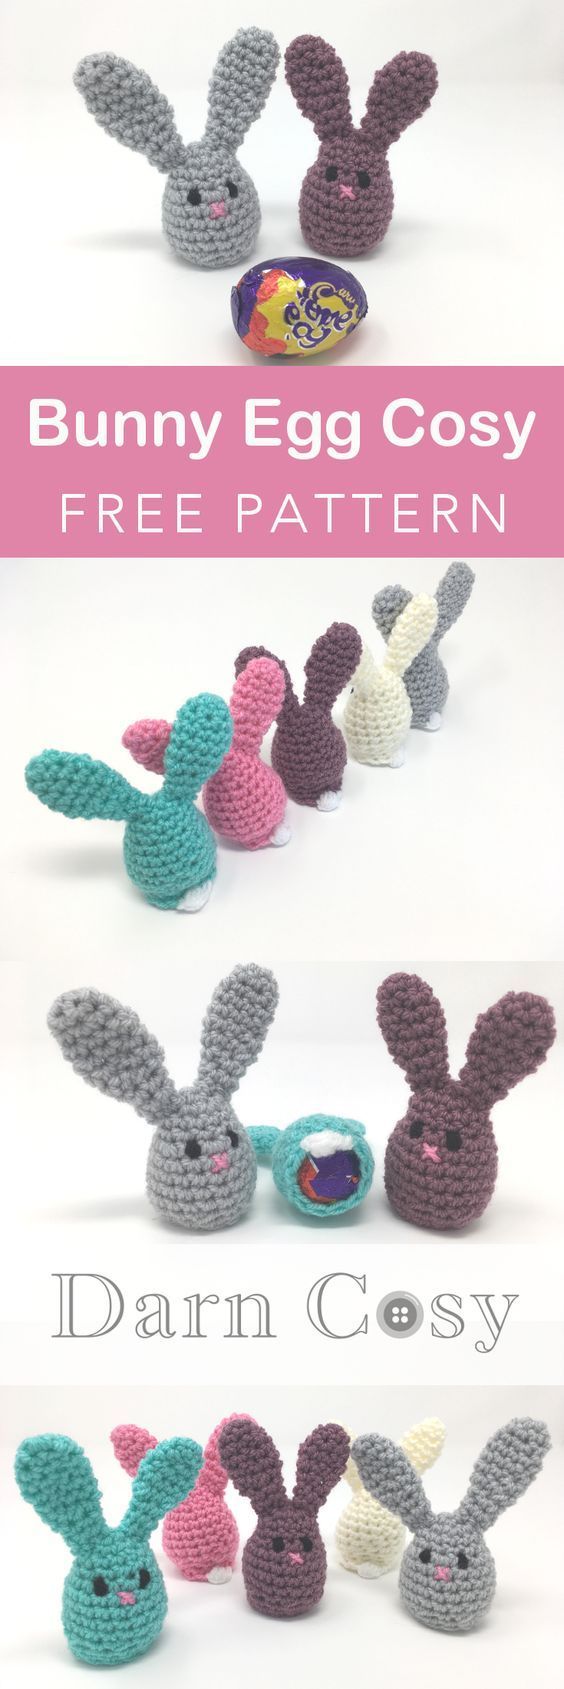 21 diy projects For Summer crochet patterns
 ideas